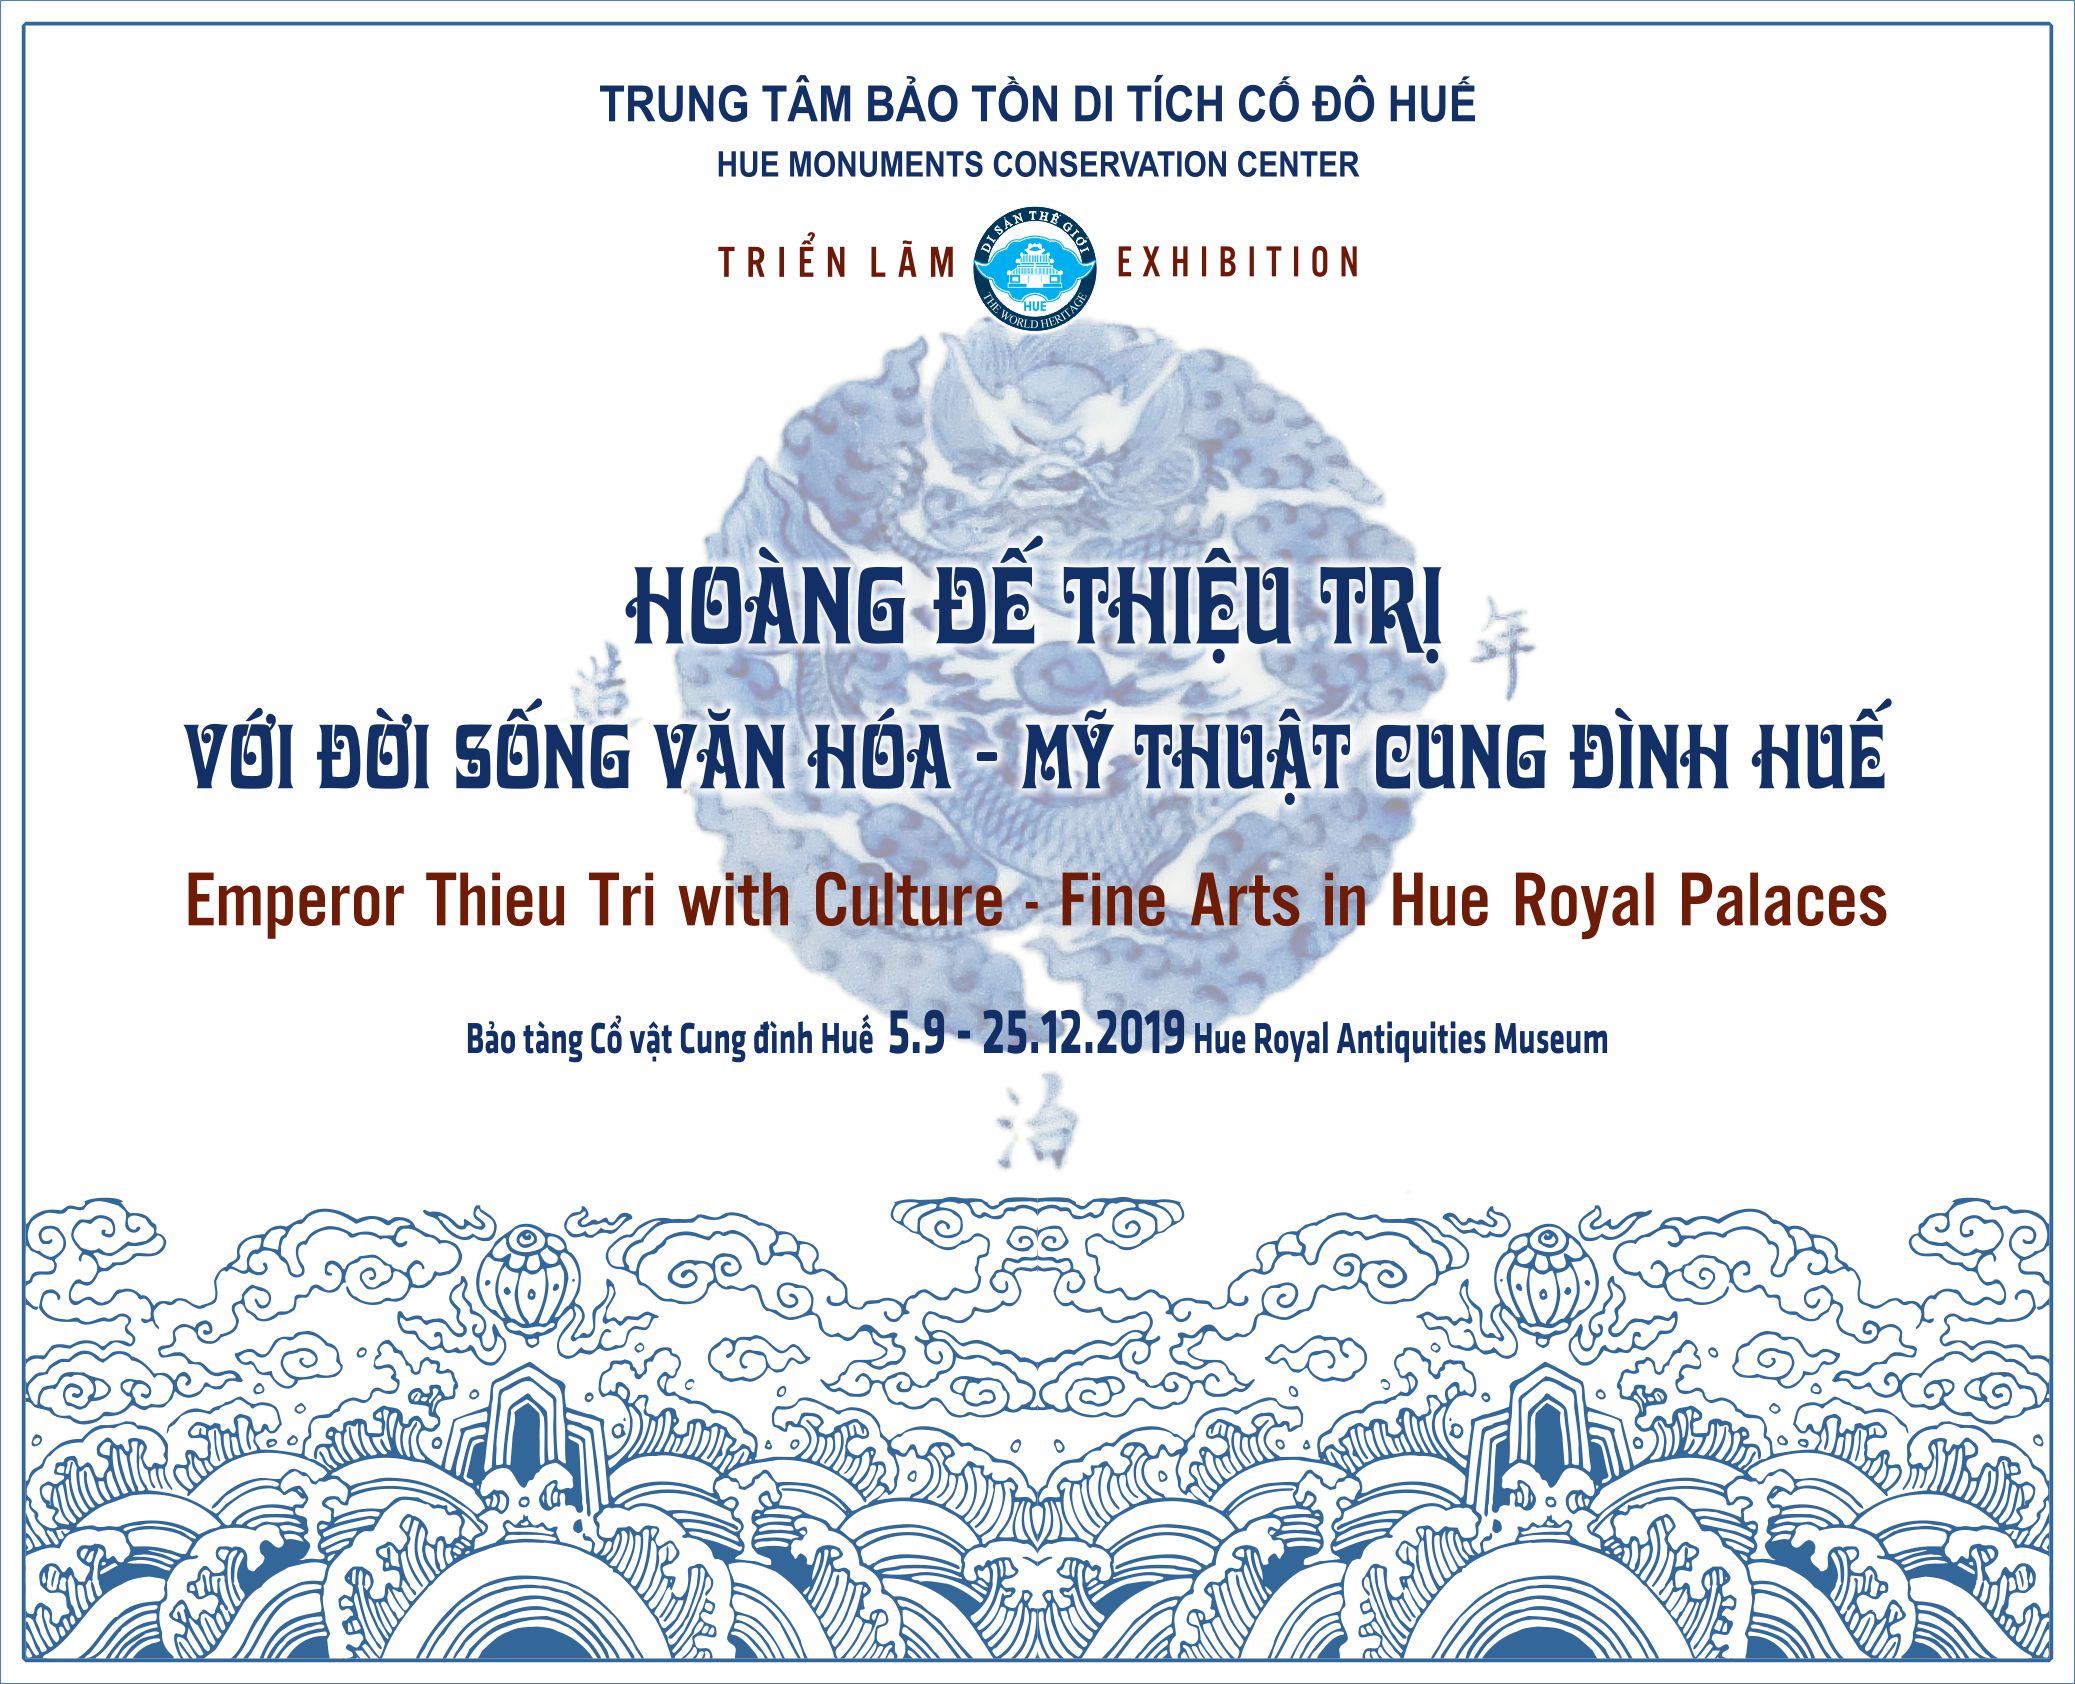 Exhibition “Emperor Thieu Tri with culture and fine arts in Hue royal palaces”